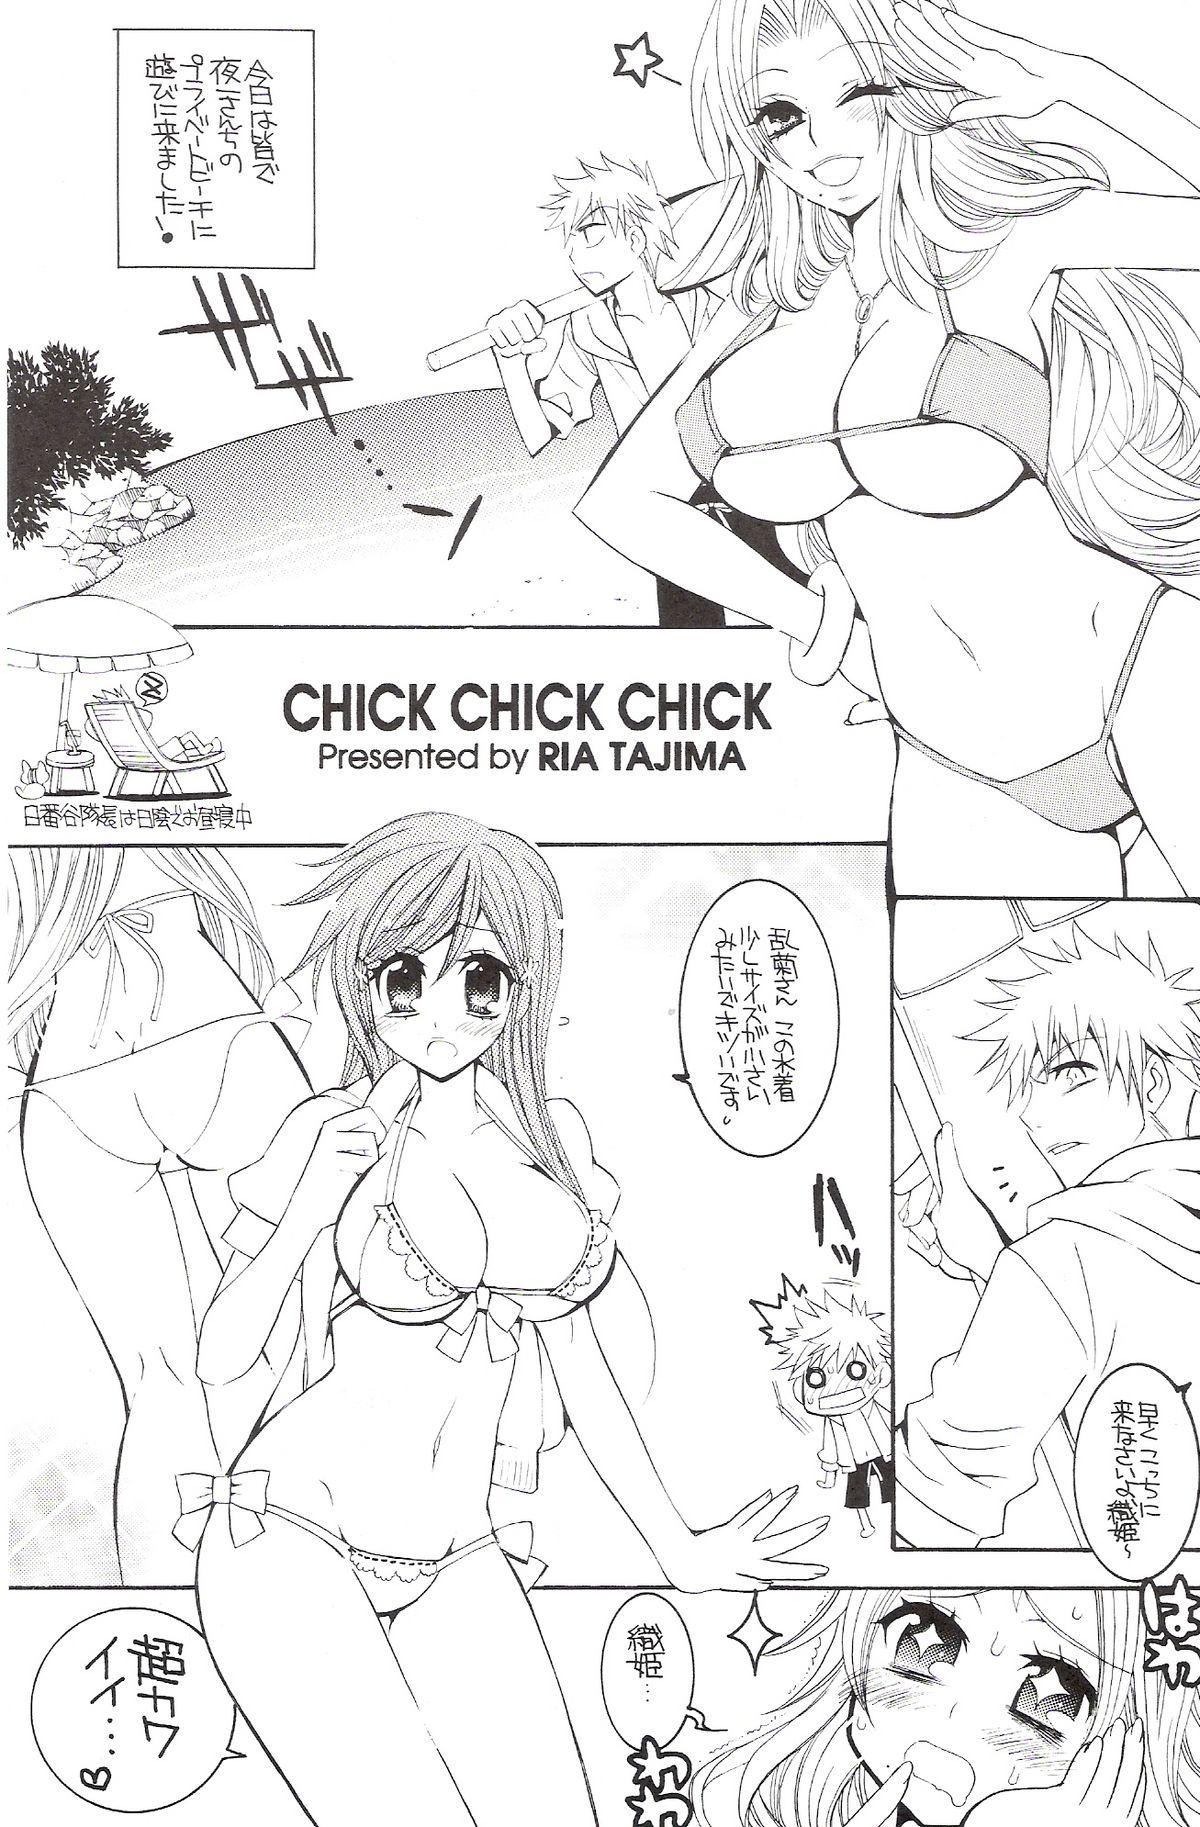 Strapon CHICK CHICK CHICK - Bleach Big Ass - Page 4